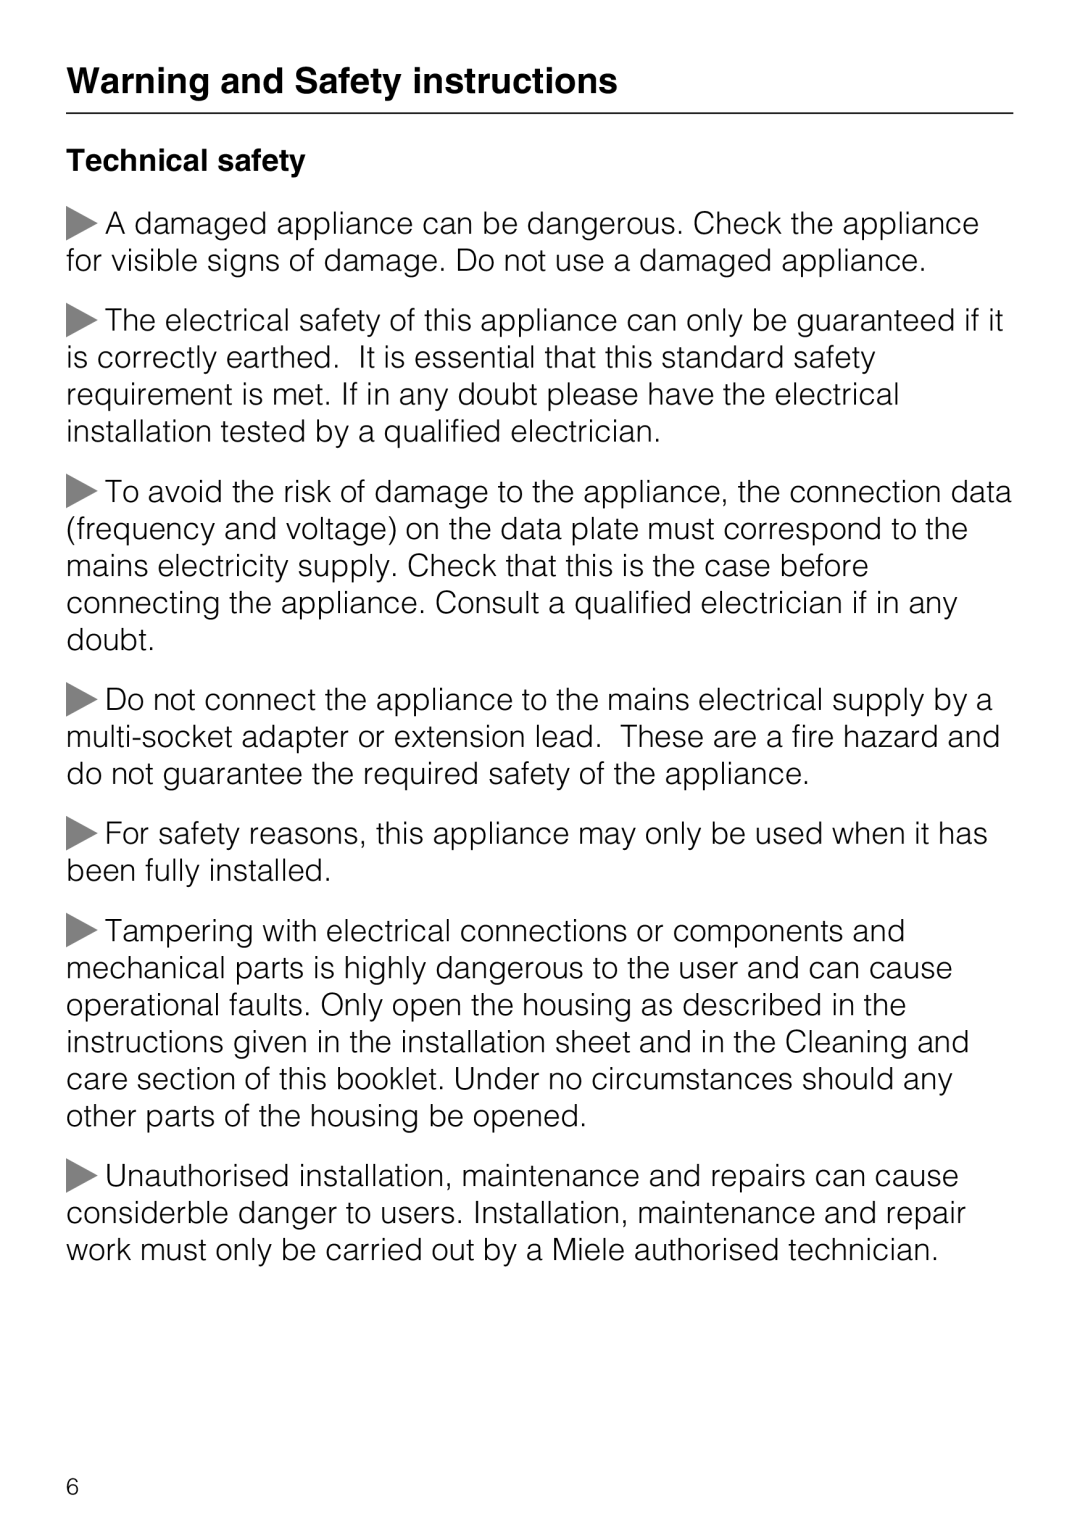 Miele 09 730 840 installation instructions Technical safety, Warning and Safety instructions 